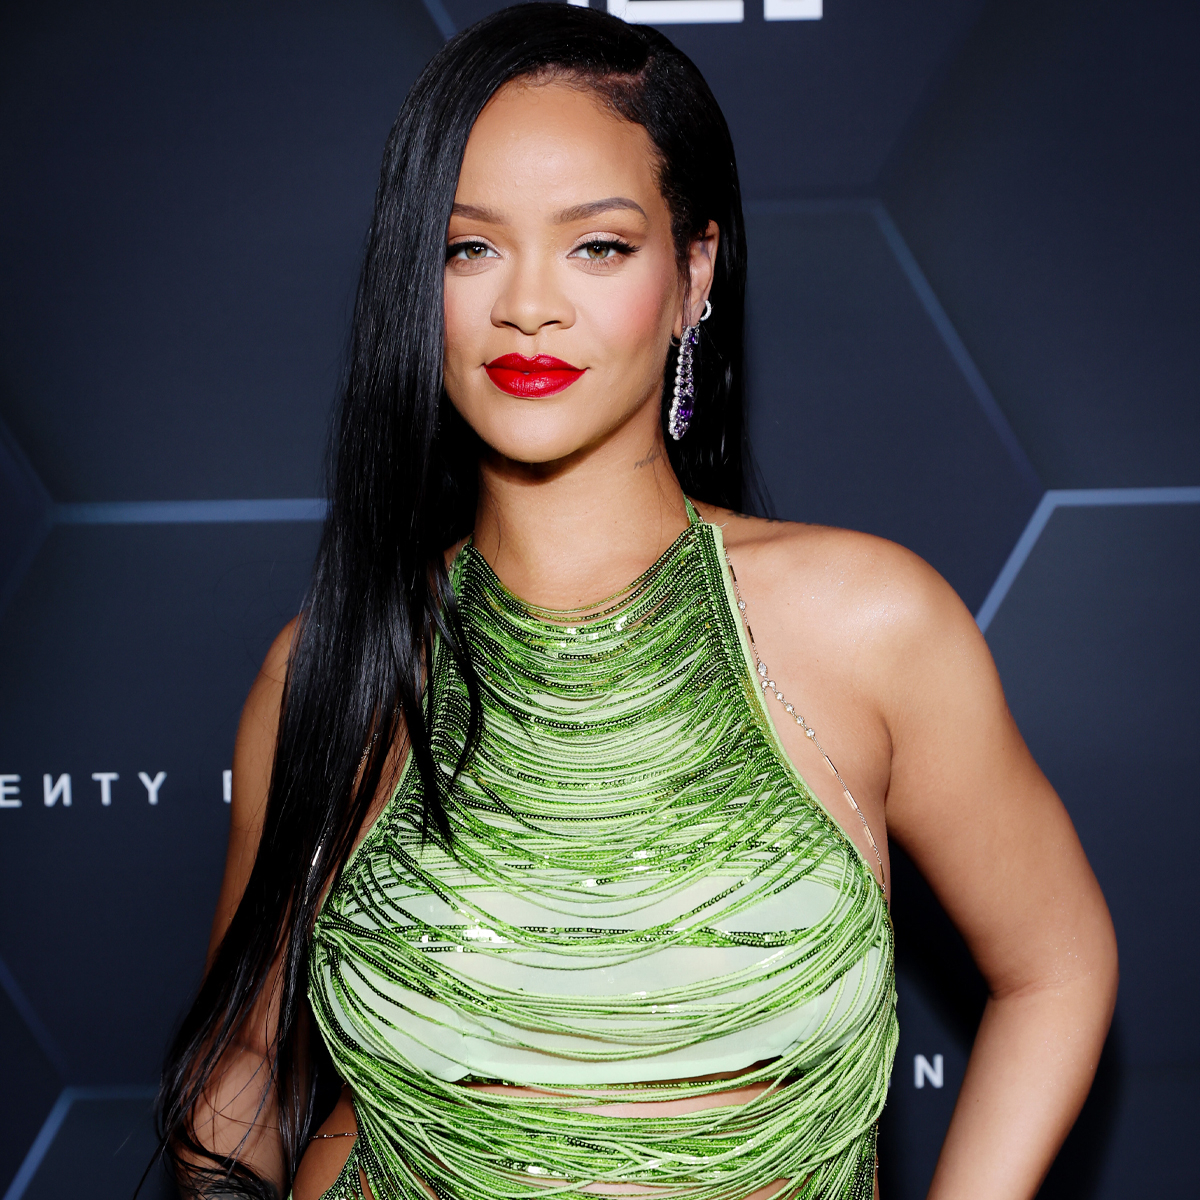 See Rihanna’s First Public Outing Since Welcoming Baby With A$AP Rocky